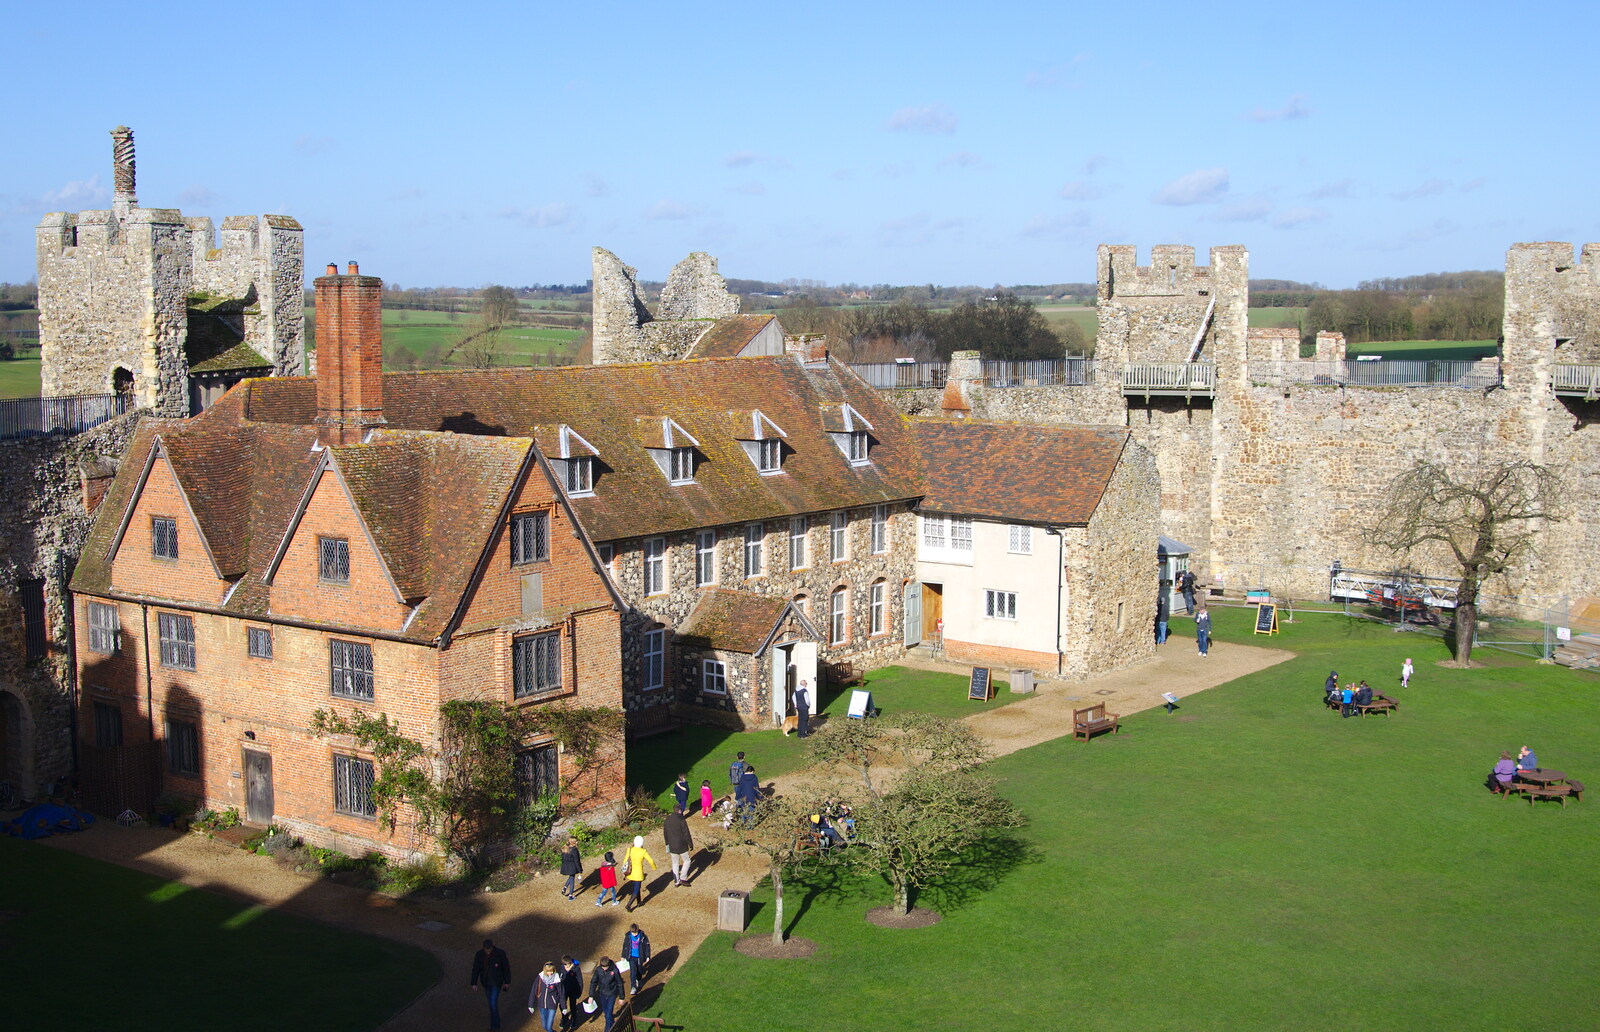 Framlingham castle from the ramparts from A Trip to Framlingham Castle, Framlingham, Suffolk - 16th February 2014